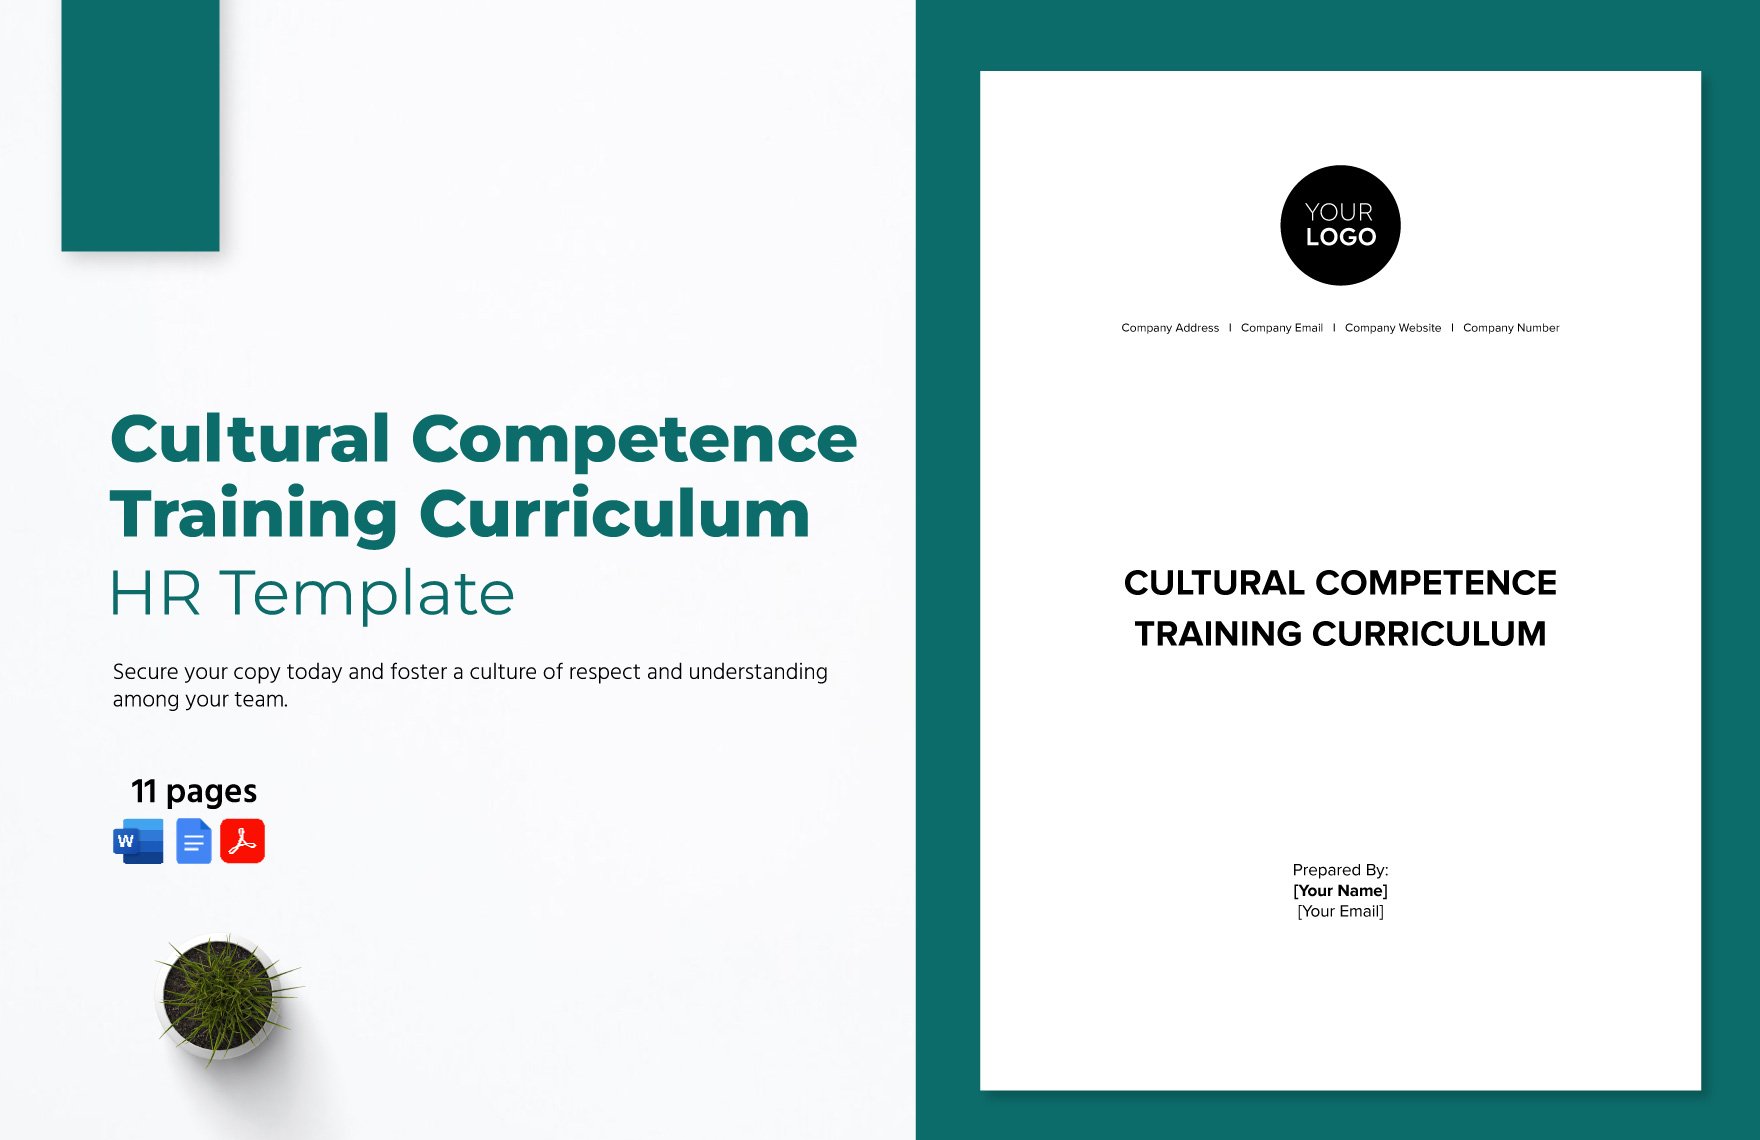 Cultural Competence Training Curriculum HR Template